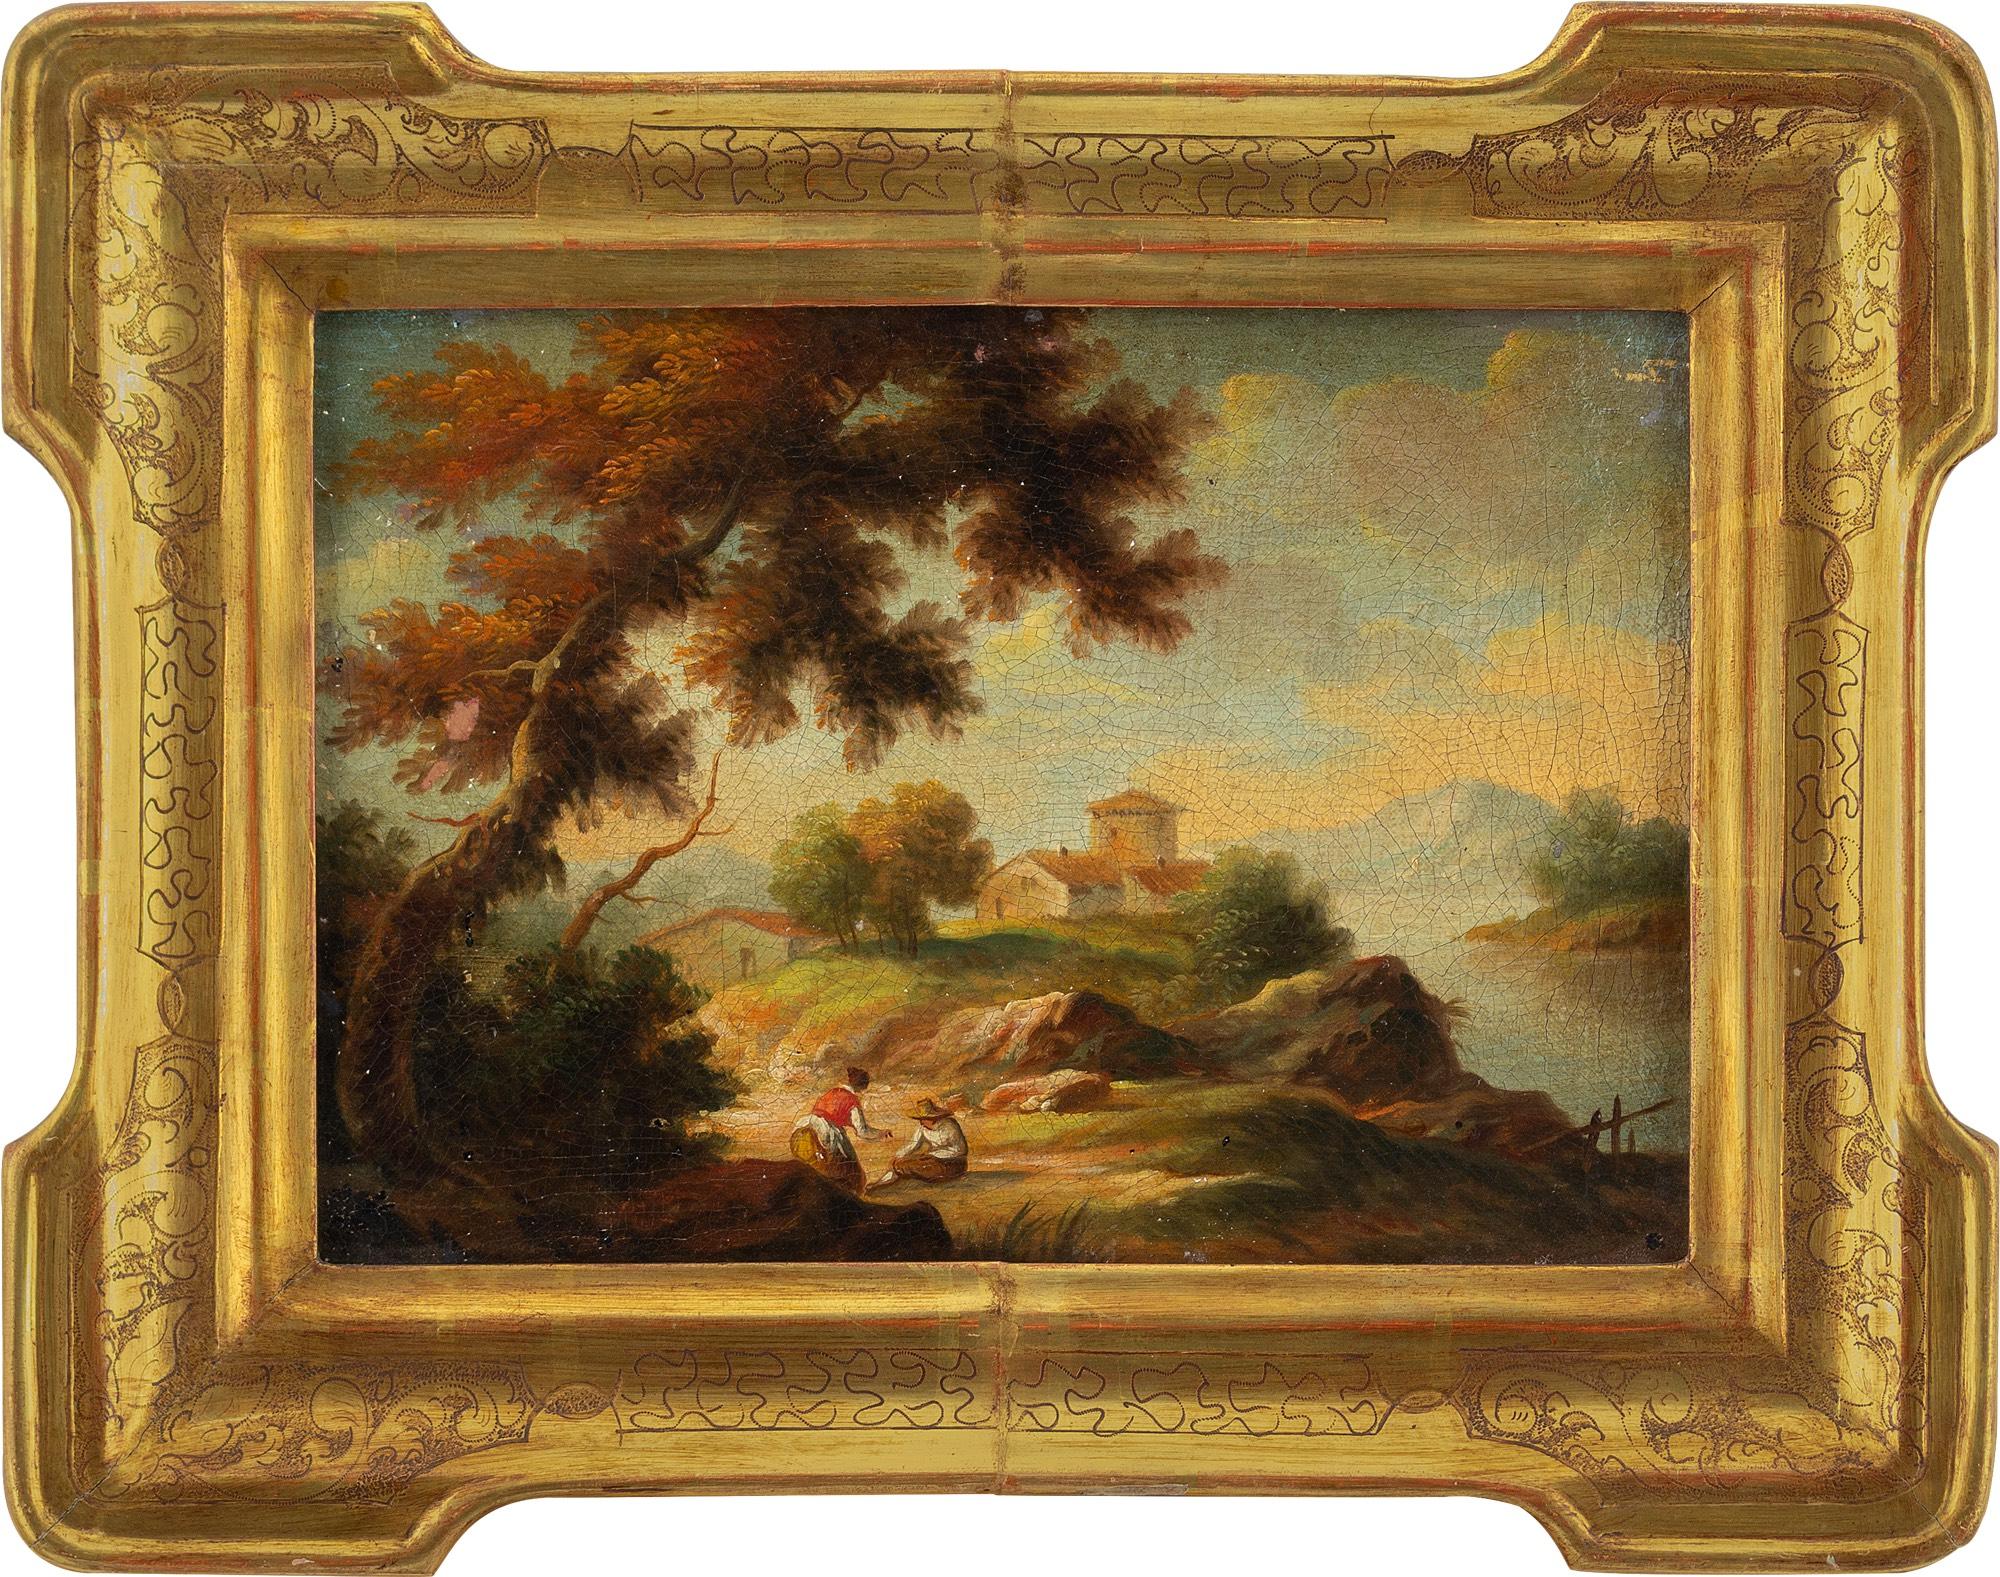 Unknown Landscape Painting - 18th-Century Italian School Landscape With Figures, Oil Painting